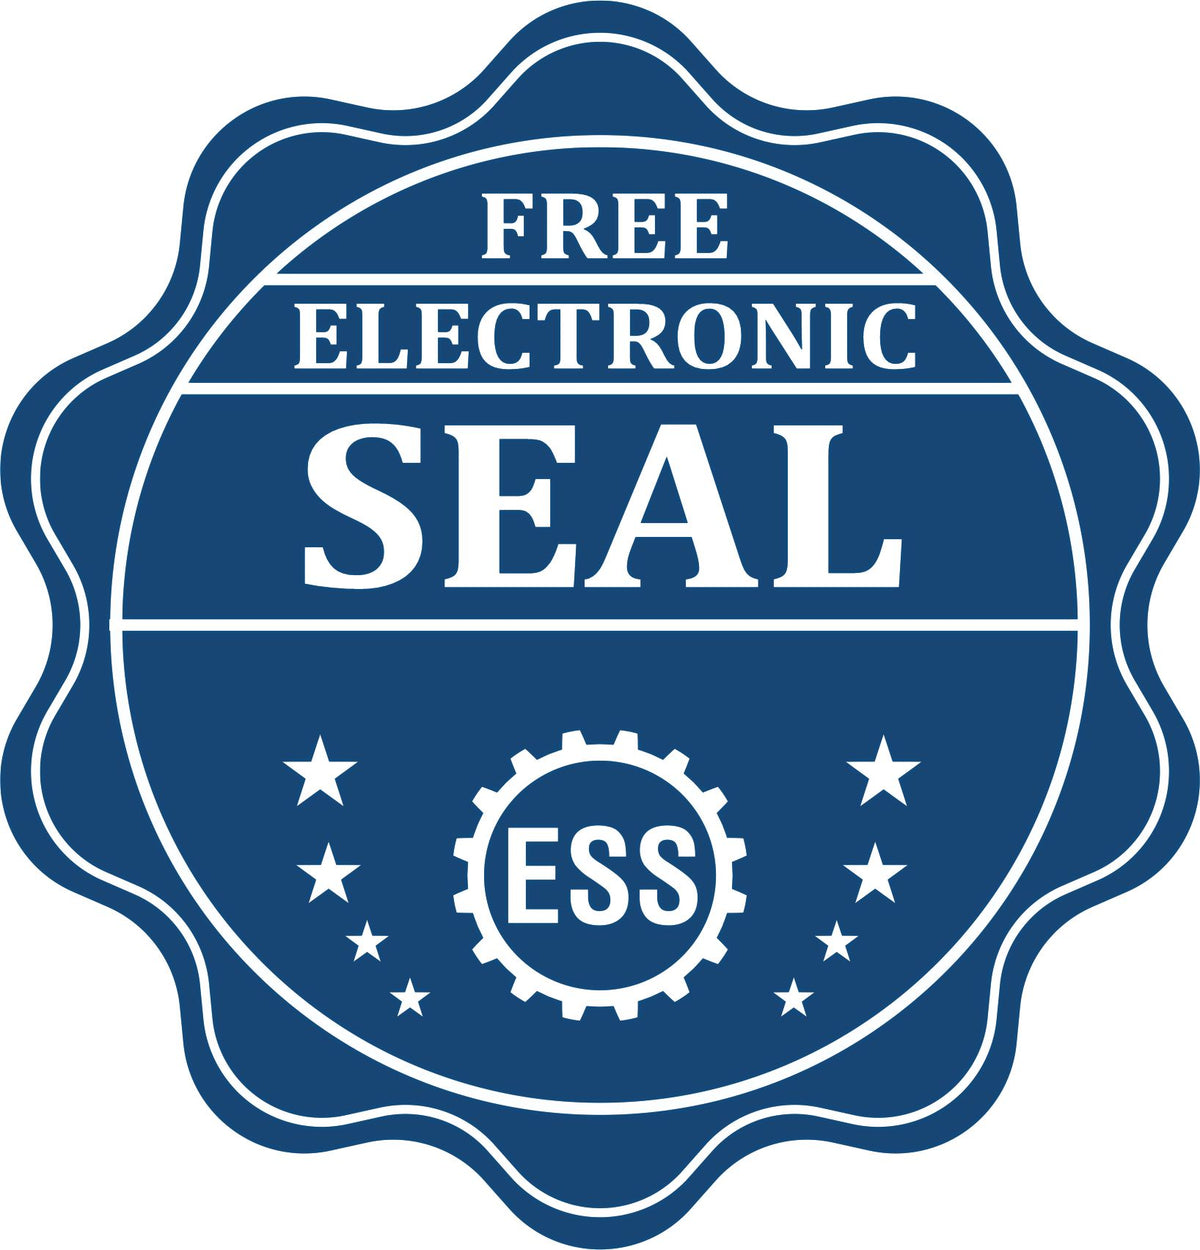 A badge showing a free electronic seal for the Extended Long Reach Delaware Surveyor Embosser with stars and the ESS gear on the emblem.